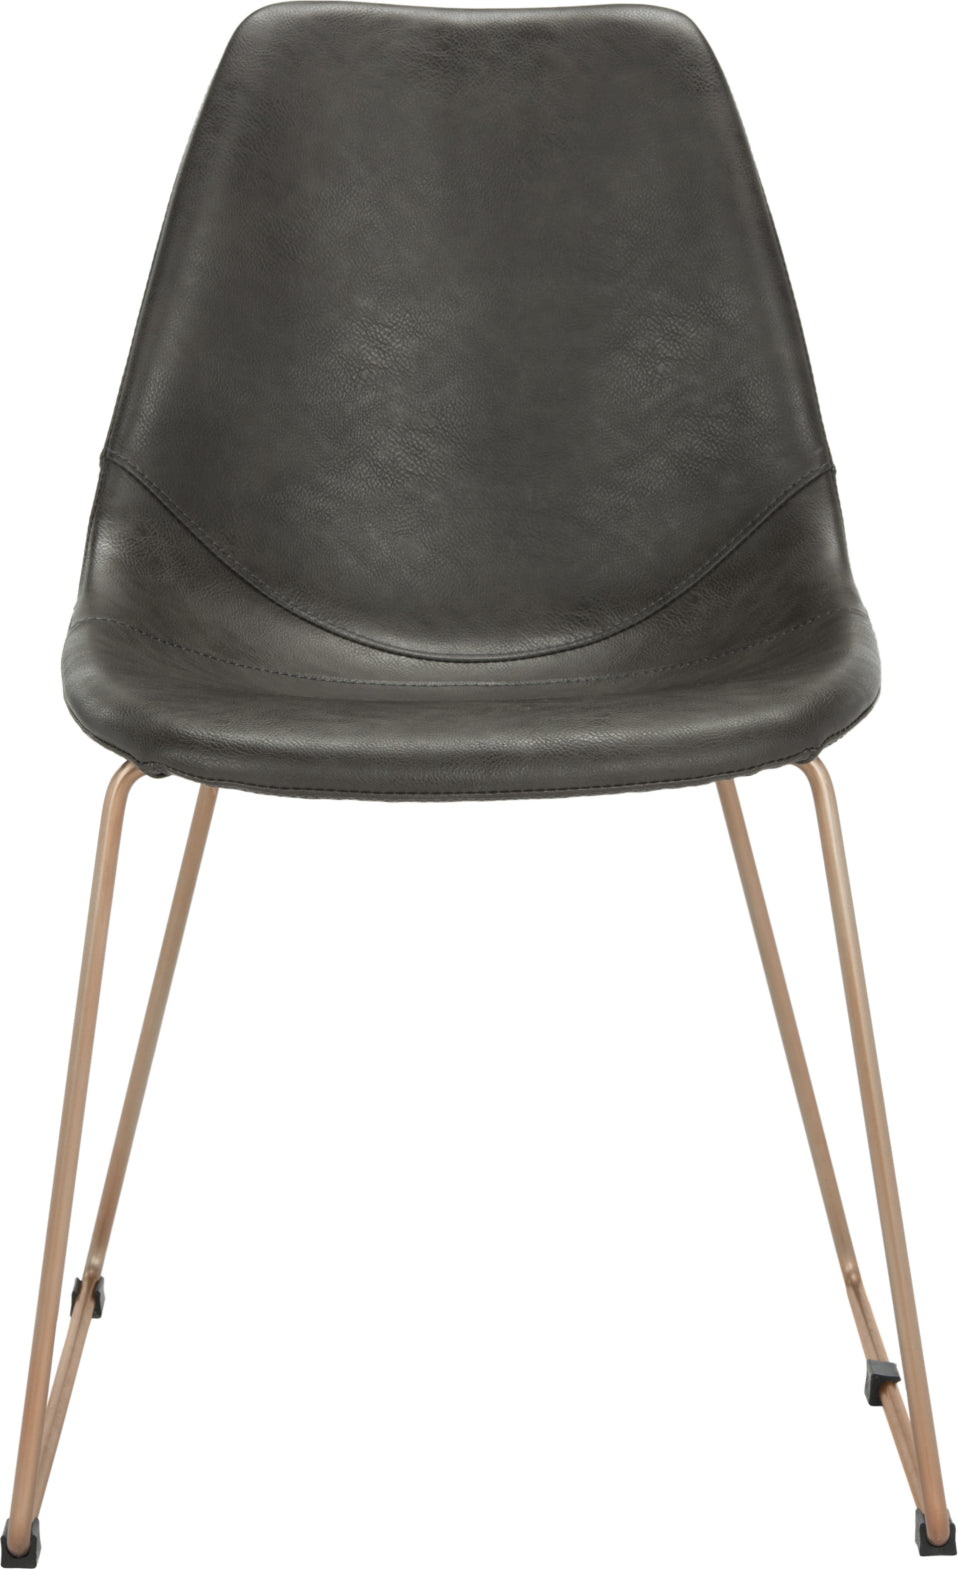 Safavieh Dorian Midcentury Modern Leather Dining Chair Grey and Copper Furniture main image